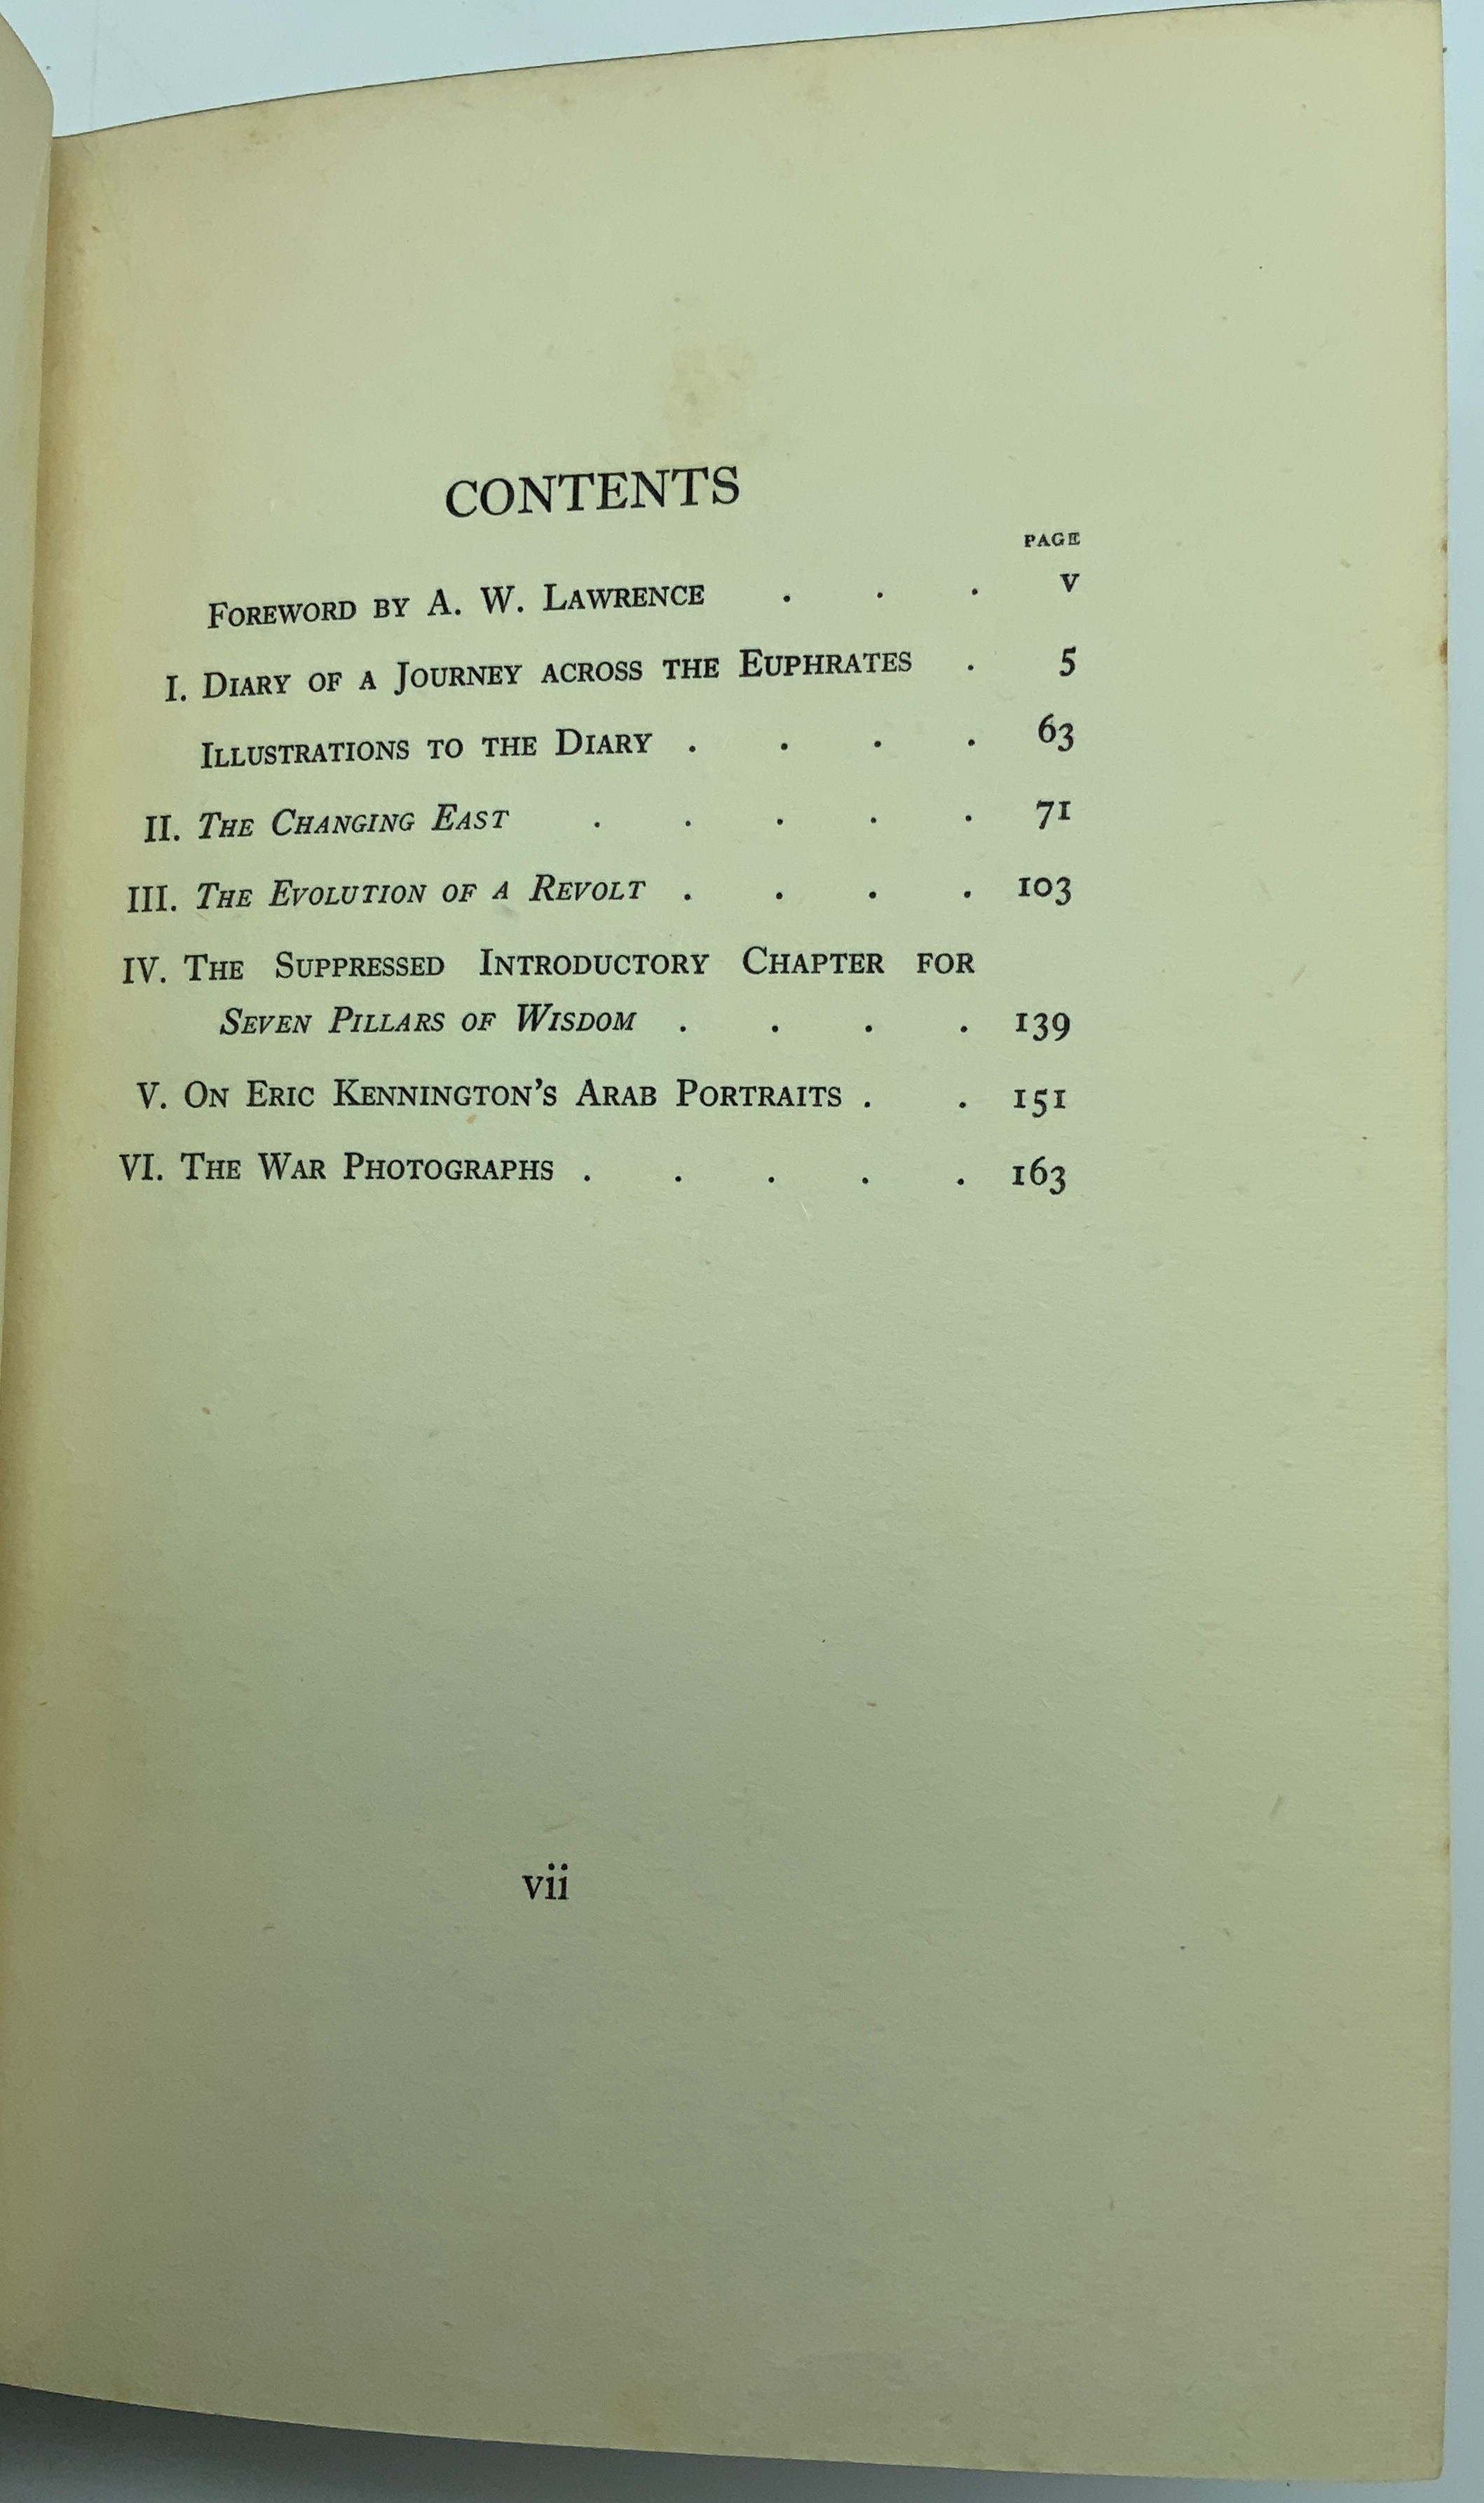 1939 ORIENTAL ASSEMBLY BY T.E. LAWRENCE PUBLISHED BY WILLIAMS AND NORGATE LTD LONDON - Image 6 of 10